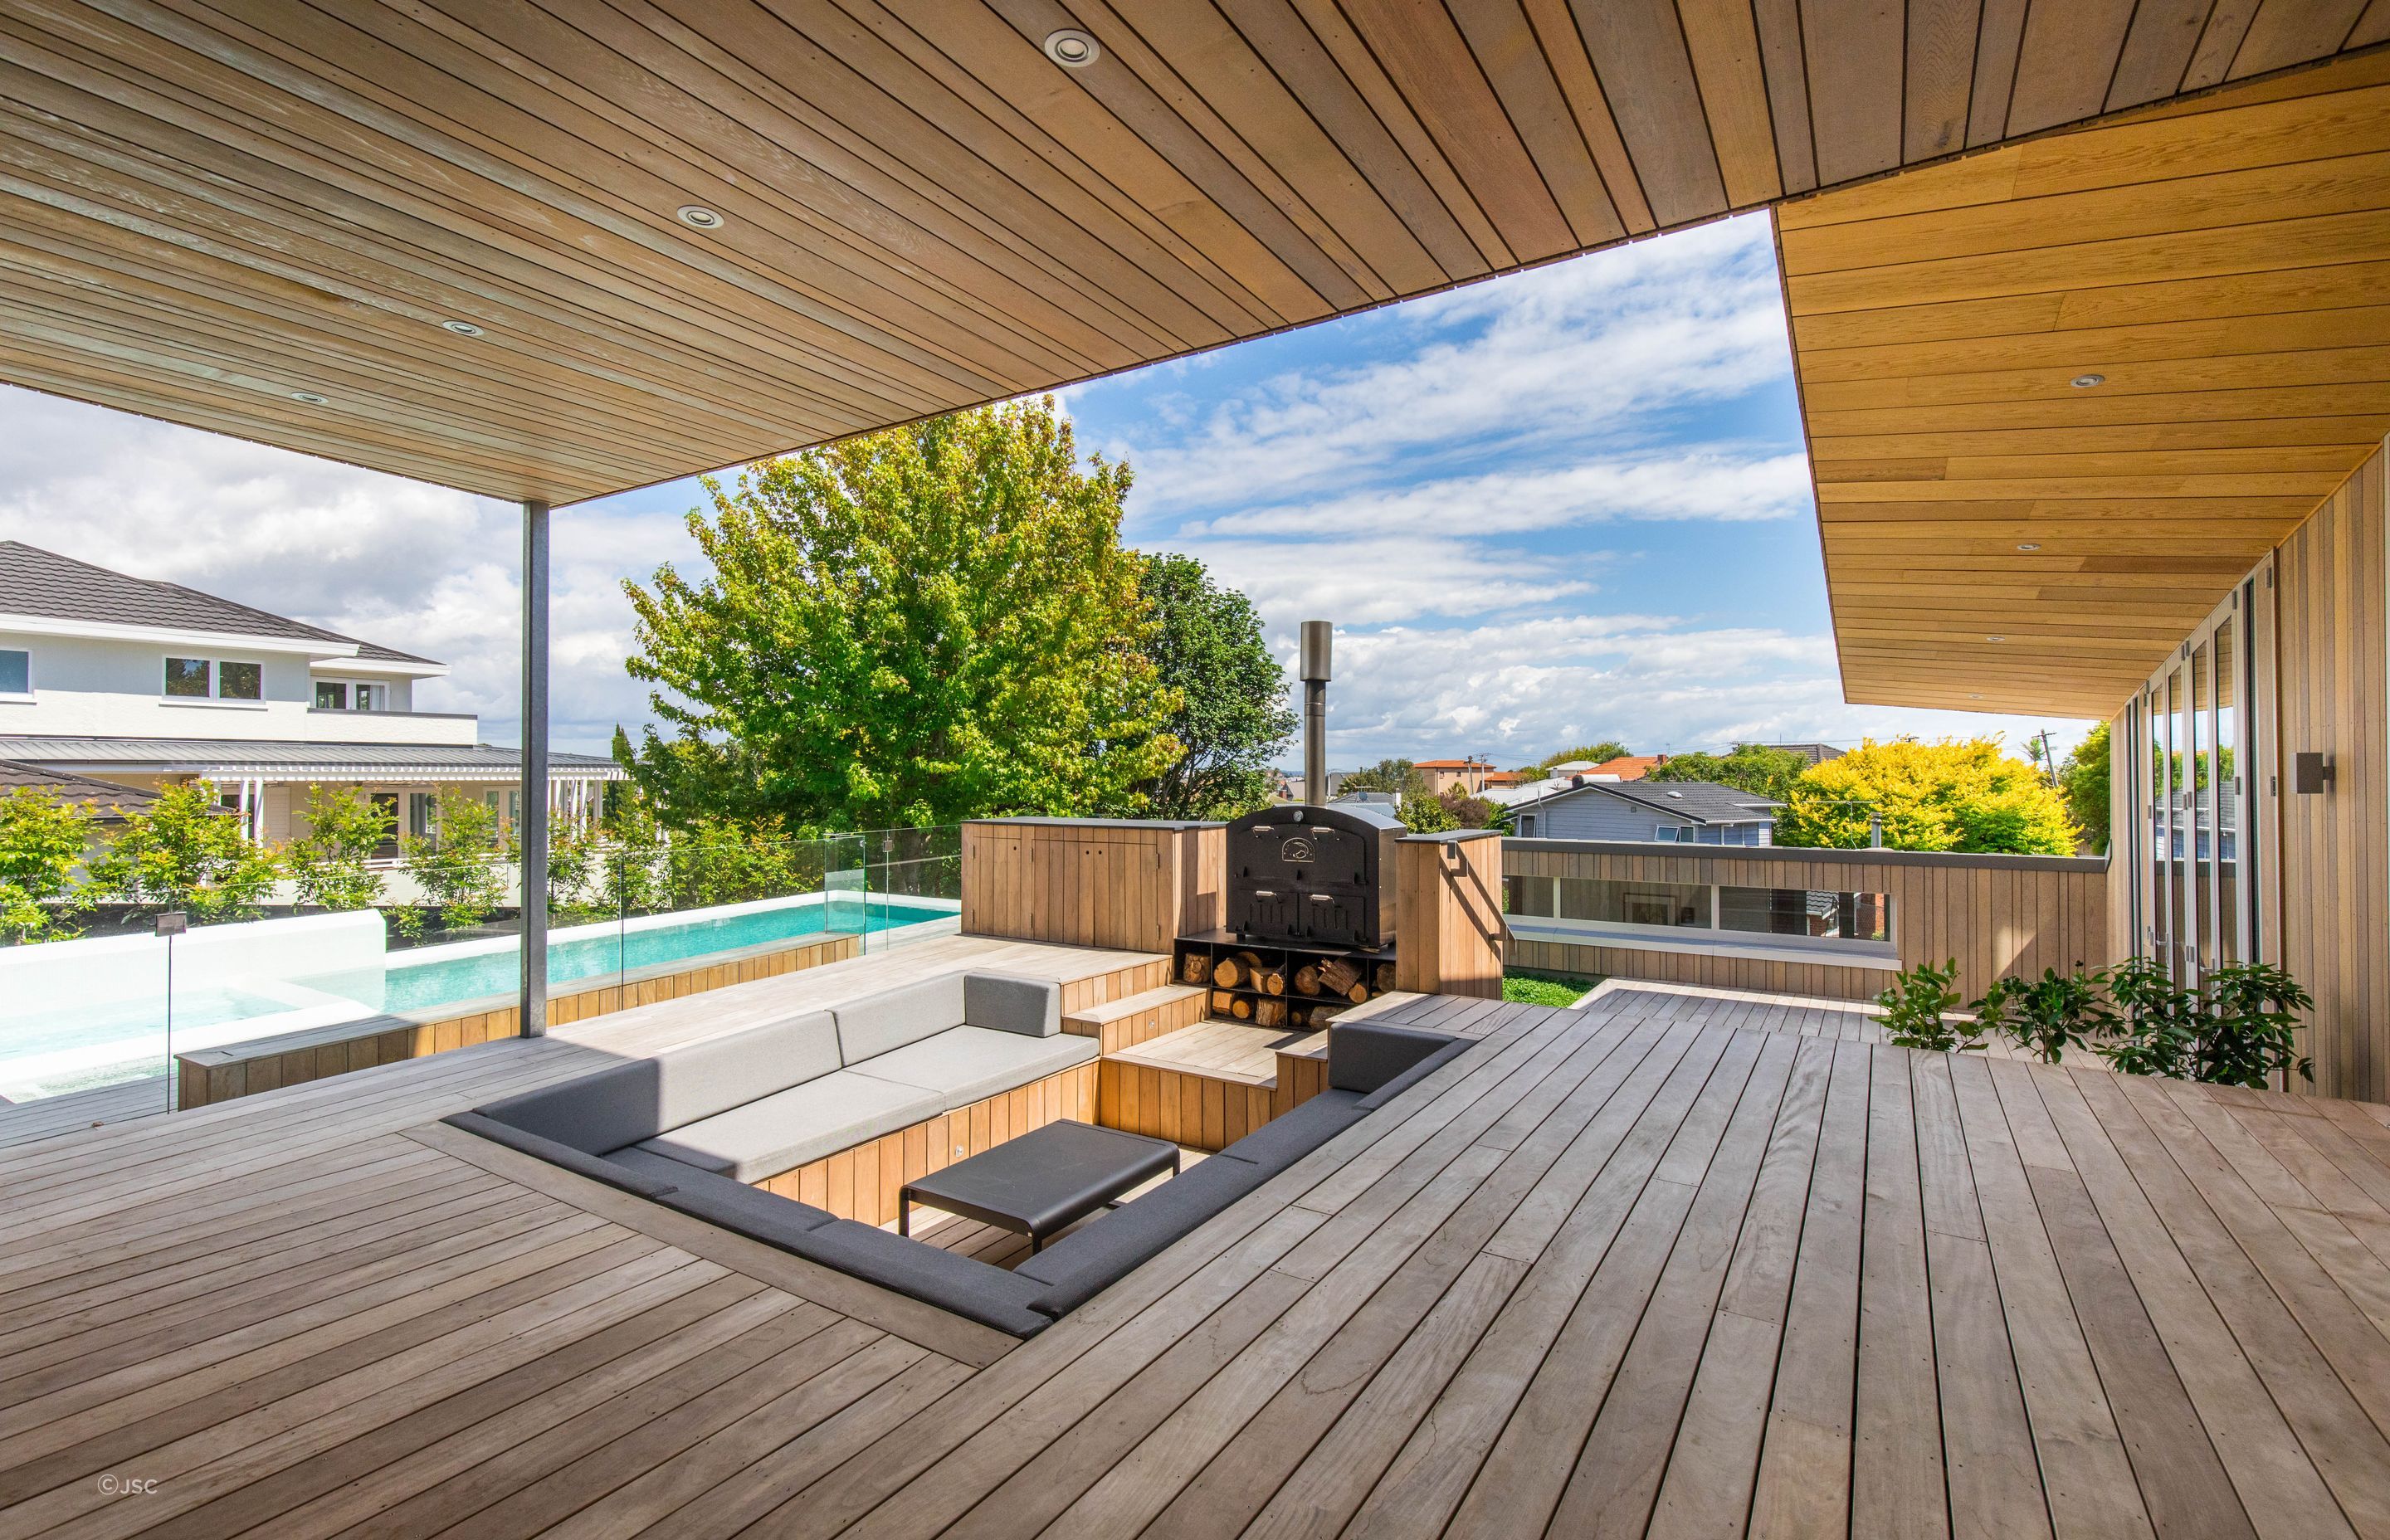 Vitex Timber Decking like this exquisite example from JSC Timber is very well suited to the sometimes harsh New Zealand climate